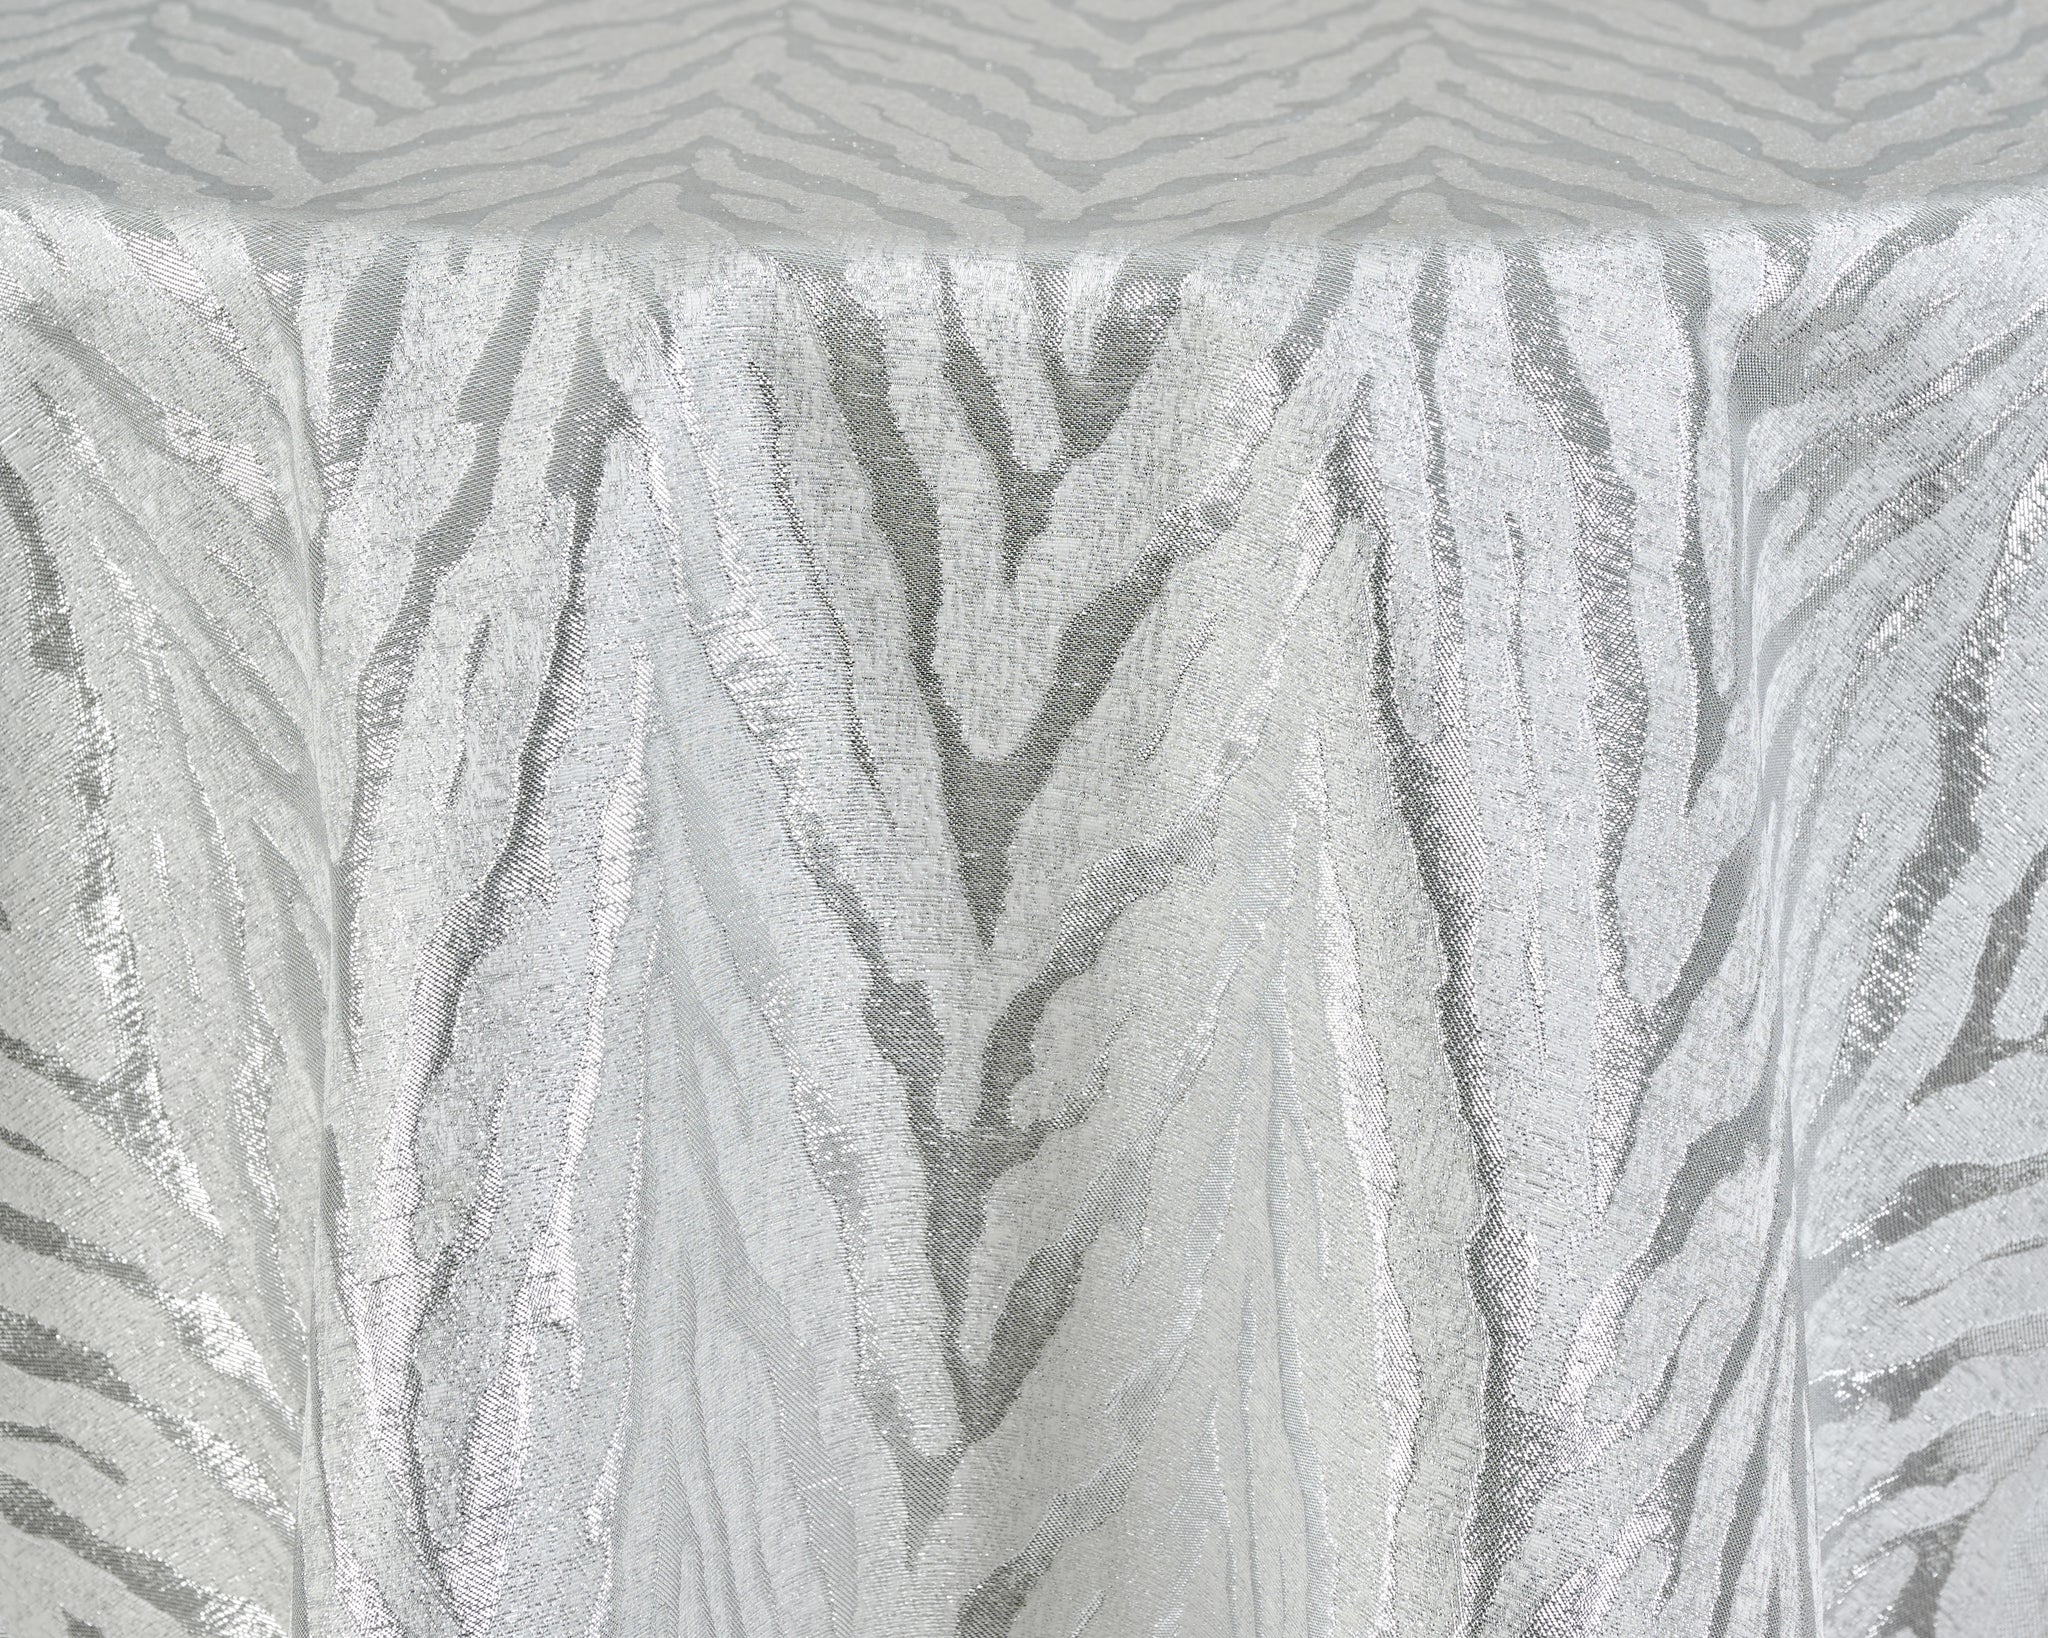 Bengala White Couture Table Linen - Reversible